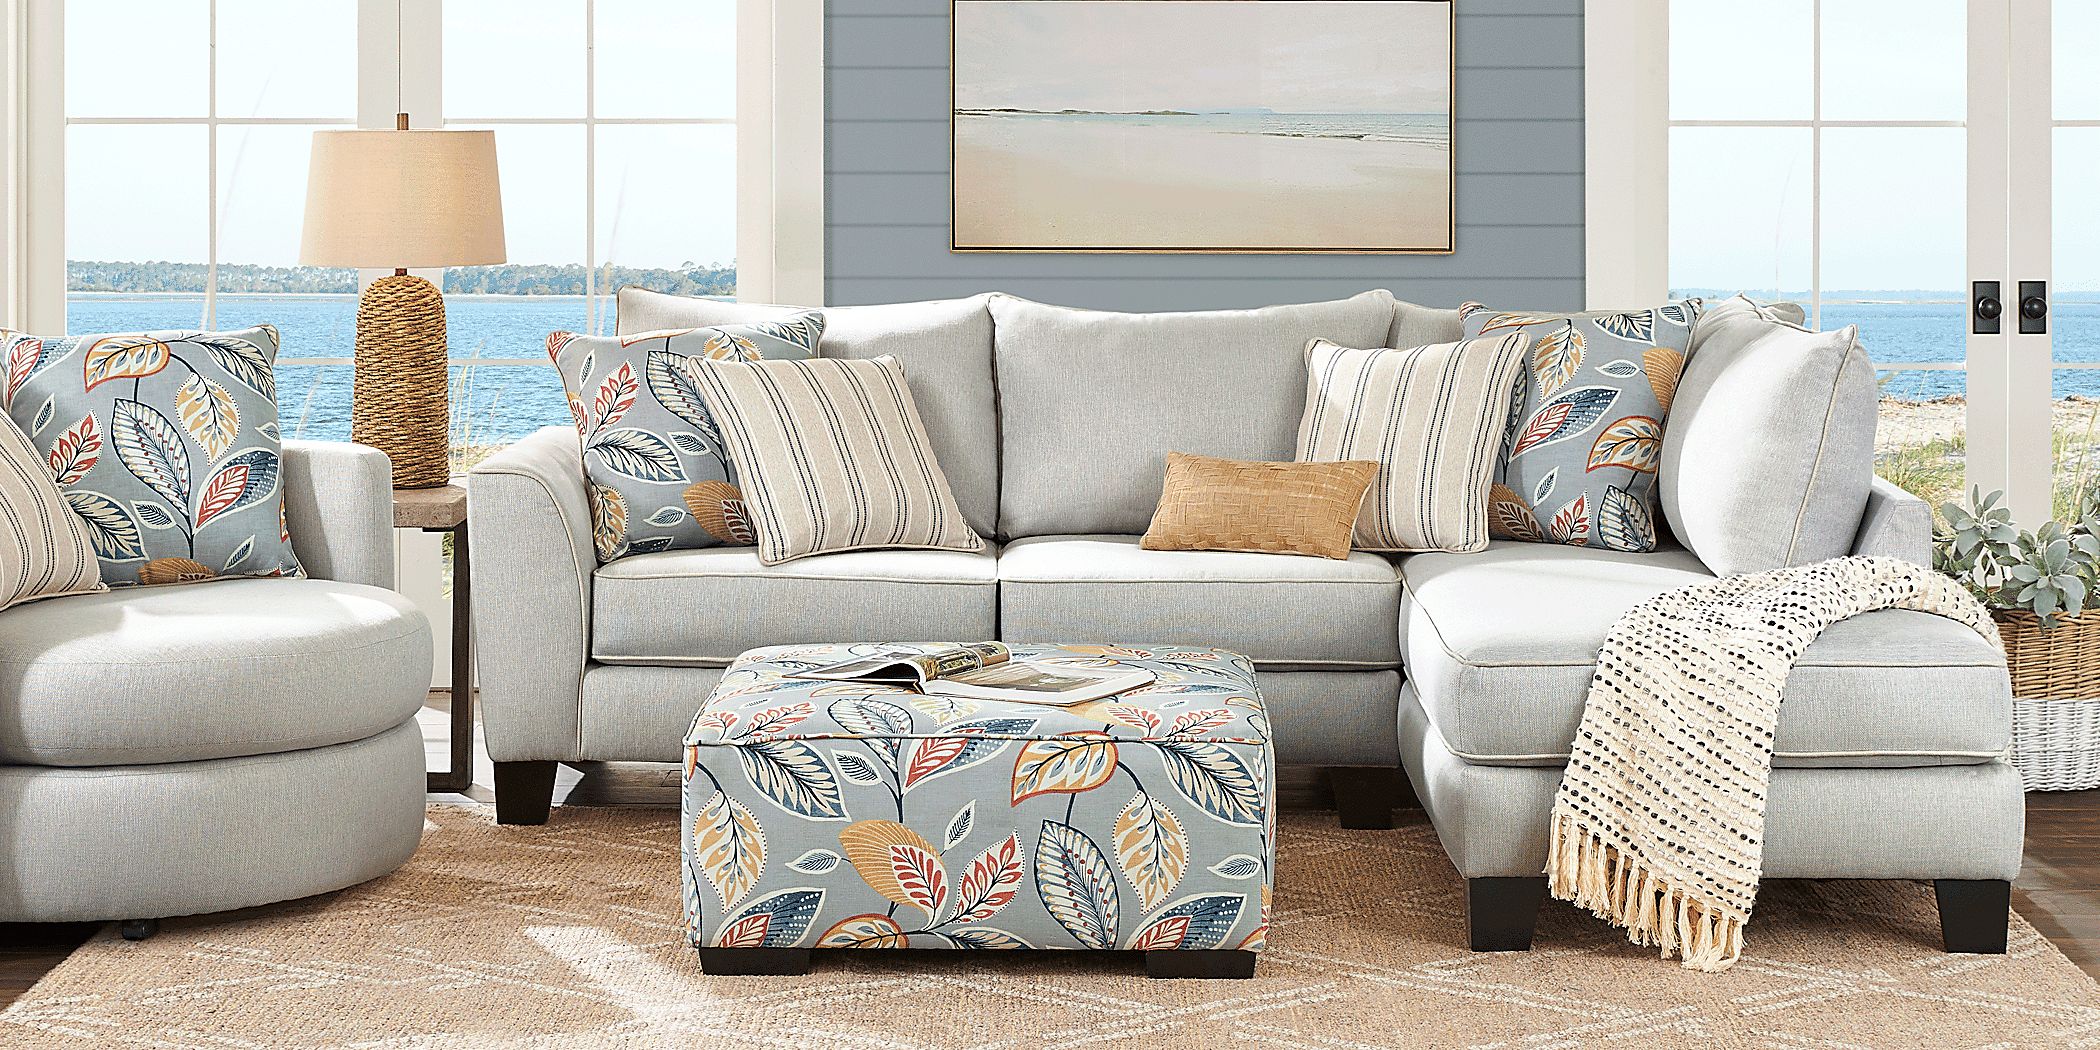 Rooms To Go Aegean Place Bluestone 3 Pc Sectional Living Room